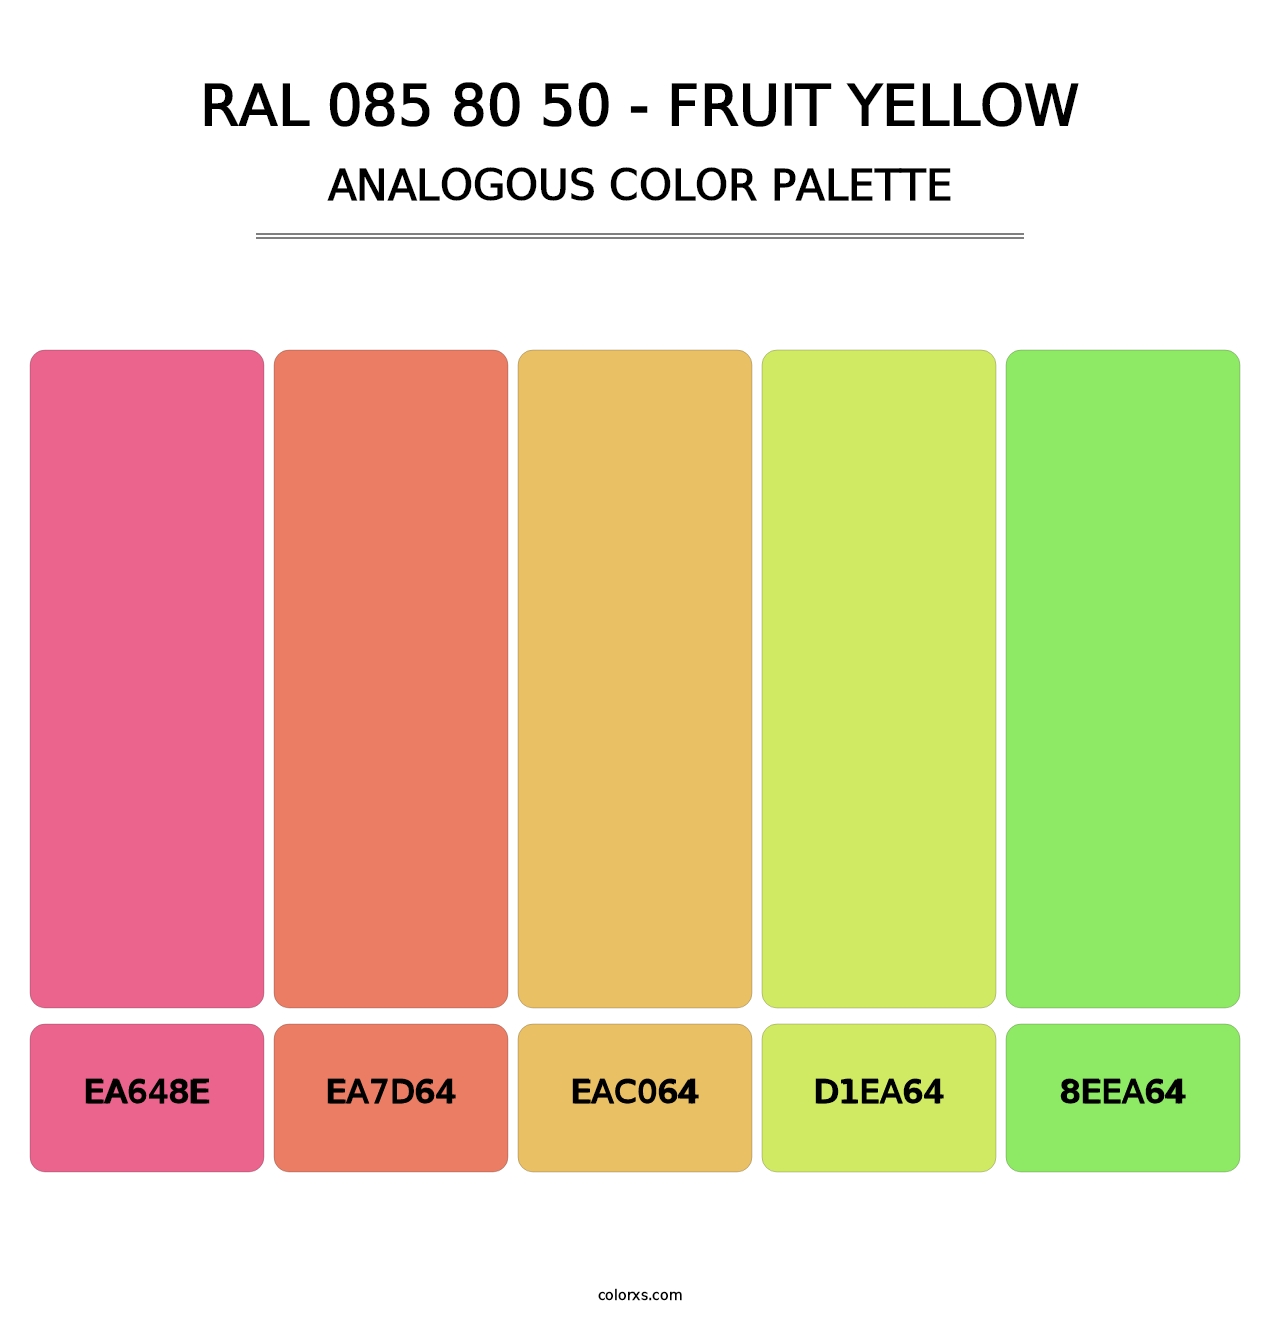 RAL 085 80 50 - Fruit Yellow - Analogous Color Palette